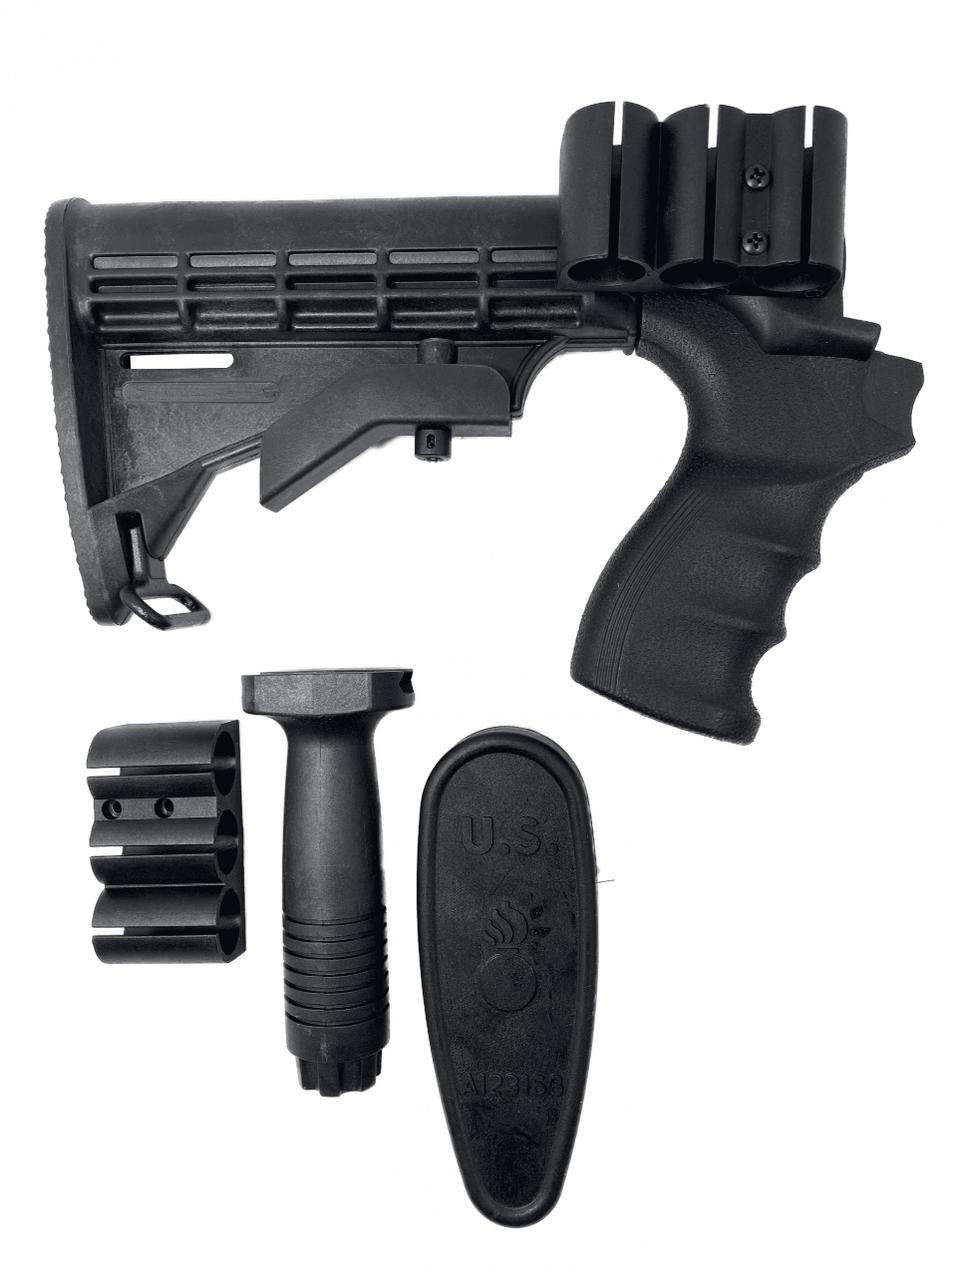 MCS Collapsible Stock Mossberg 500/590 12GA with Pistol Grip 